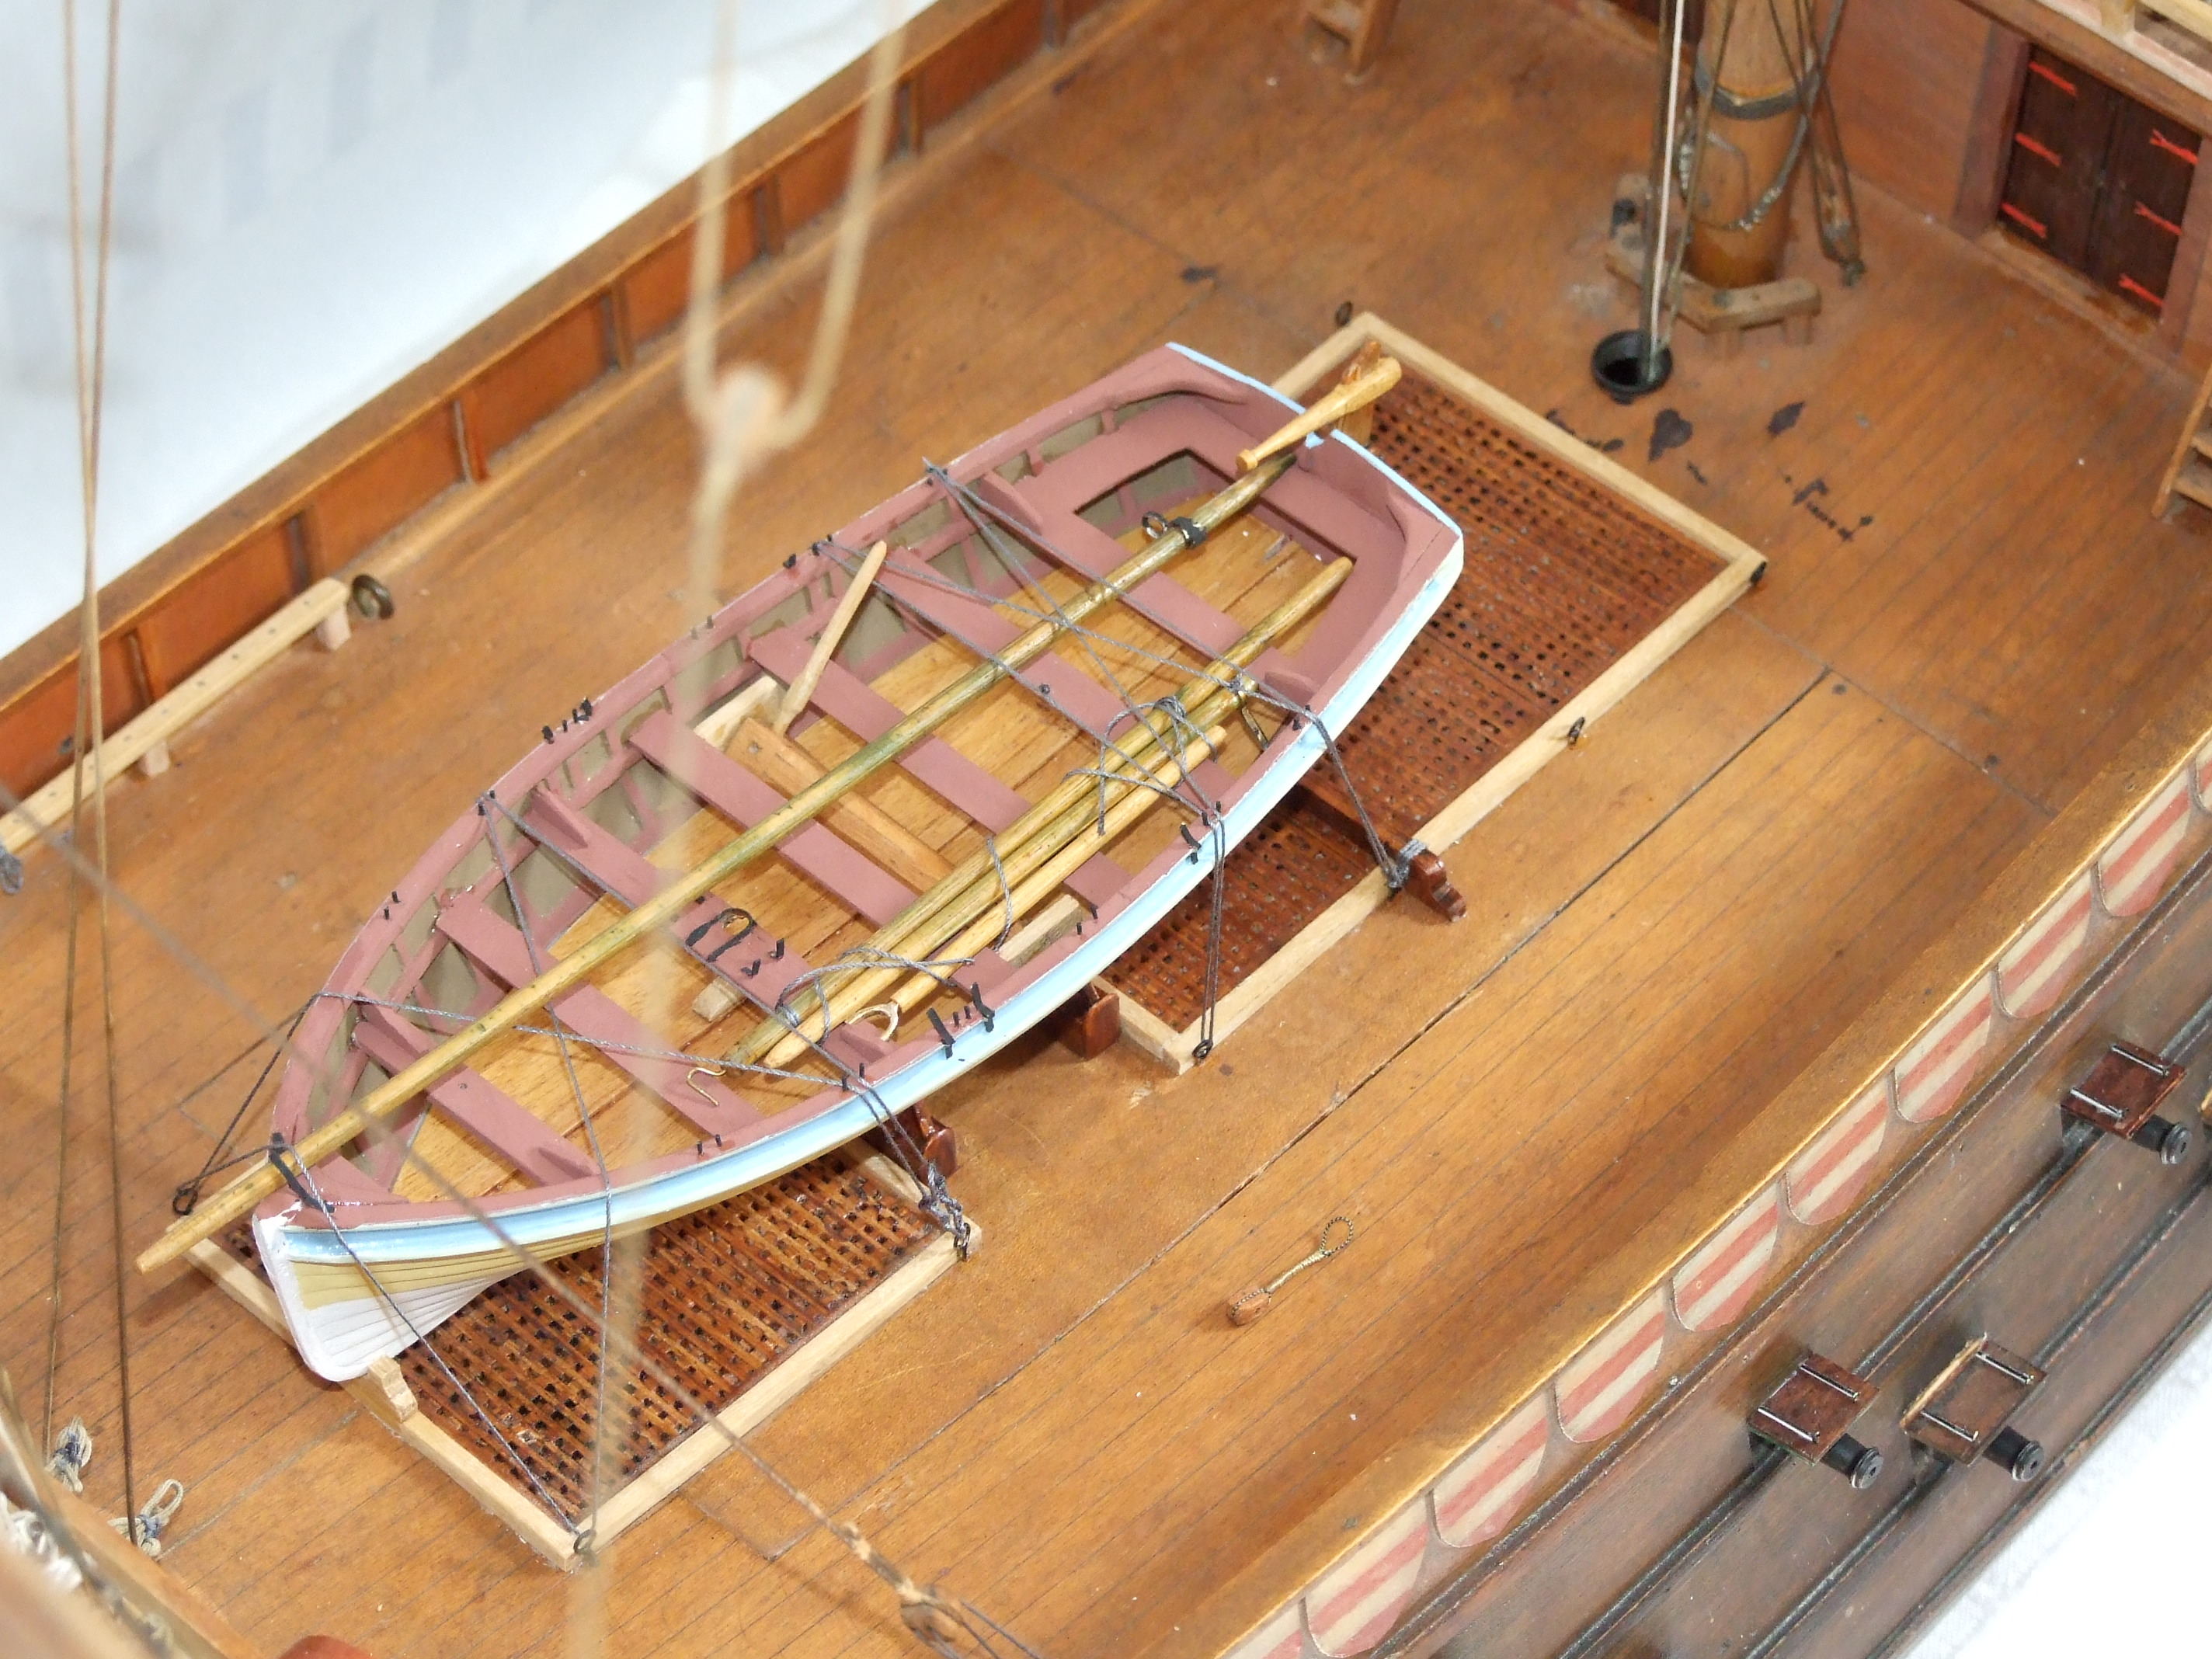 Sailing Ship, Galleon Model, Elizabethan, for sale, Walter Raleigh, Spanish Armada, White Bear, Revenge, Golden Hind, Mary Rose, Mayflower, Royal Sovereign, Ark Royal, Triumph, Great Bark, Great Harry, Golden Lion, Race Built, English Warship, crows nest, National Maritime Museum, Ships Boat, Medway